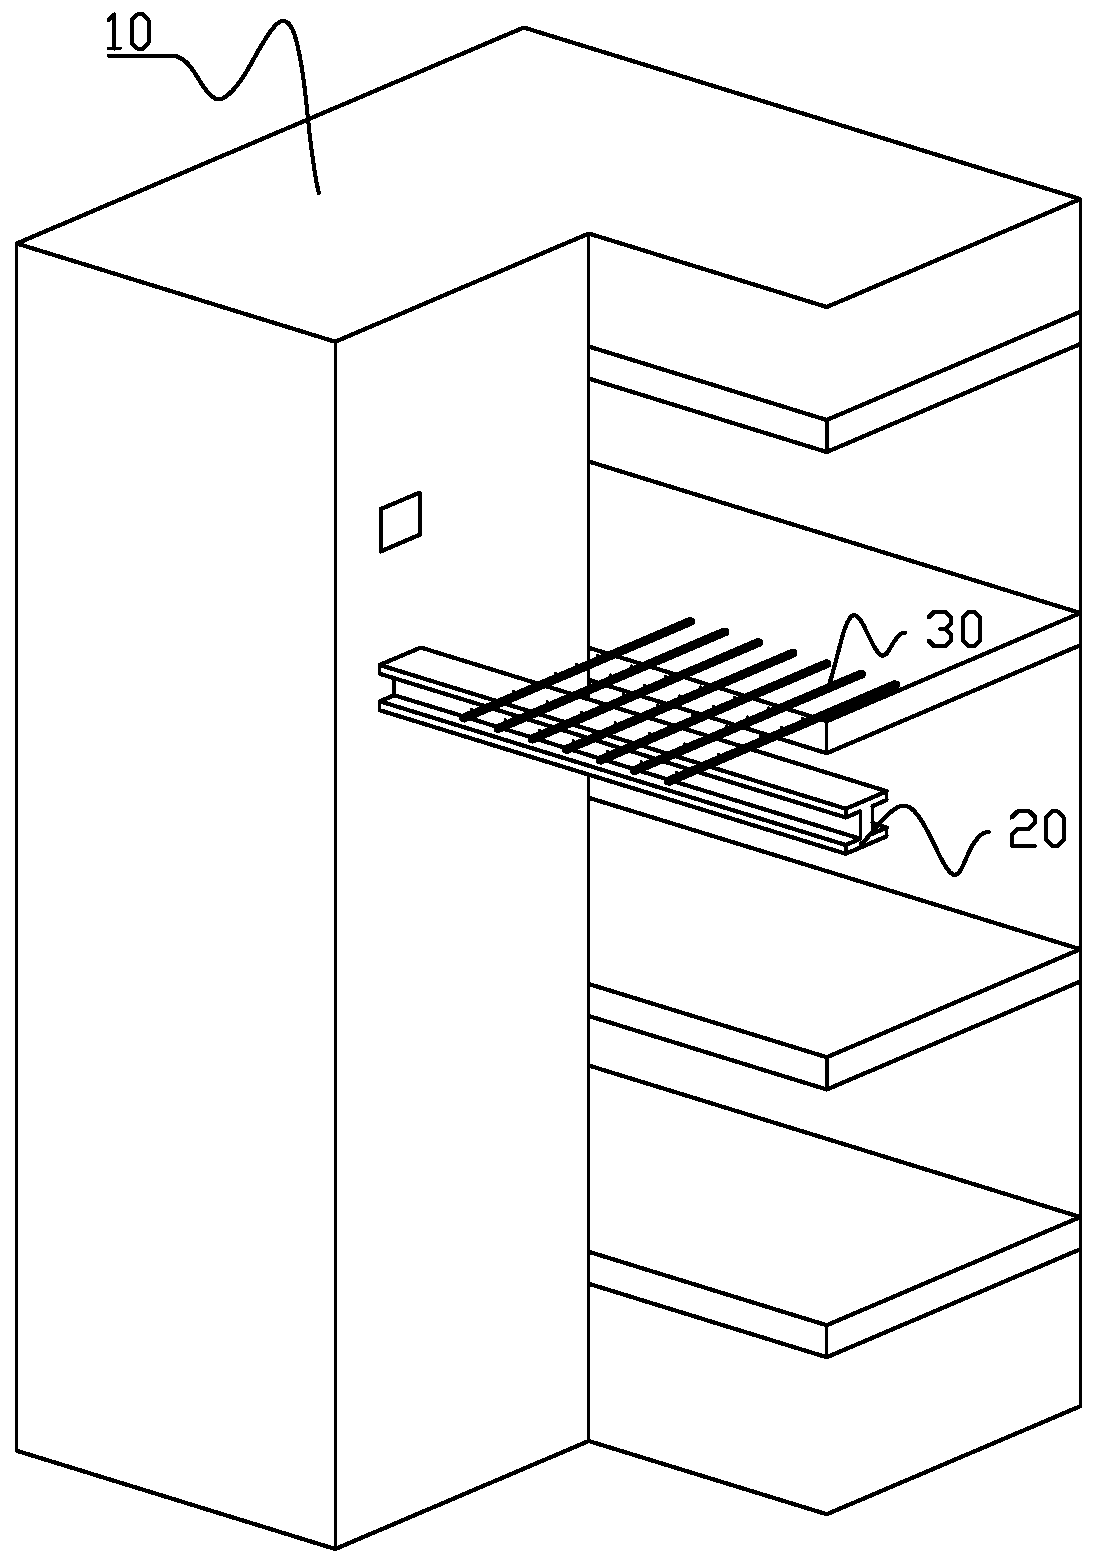 Construction method for connecting beams of super high-rise building